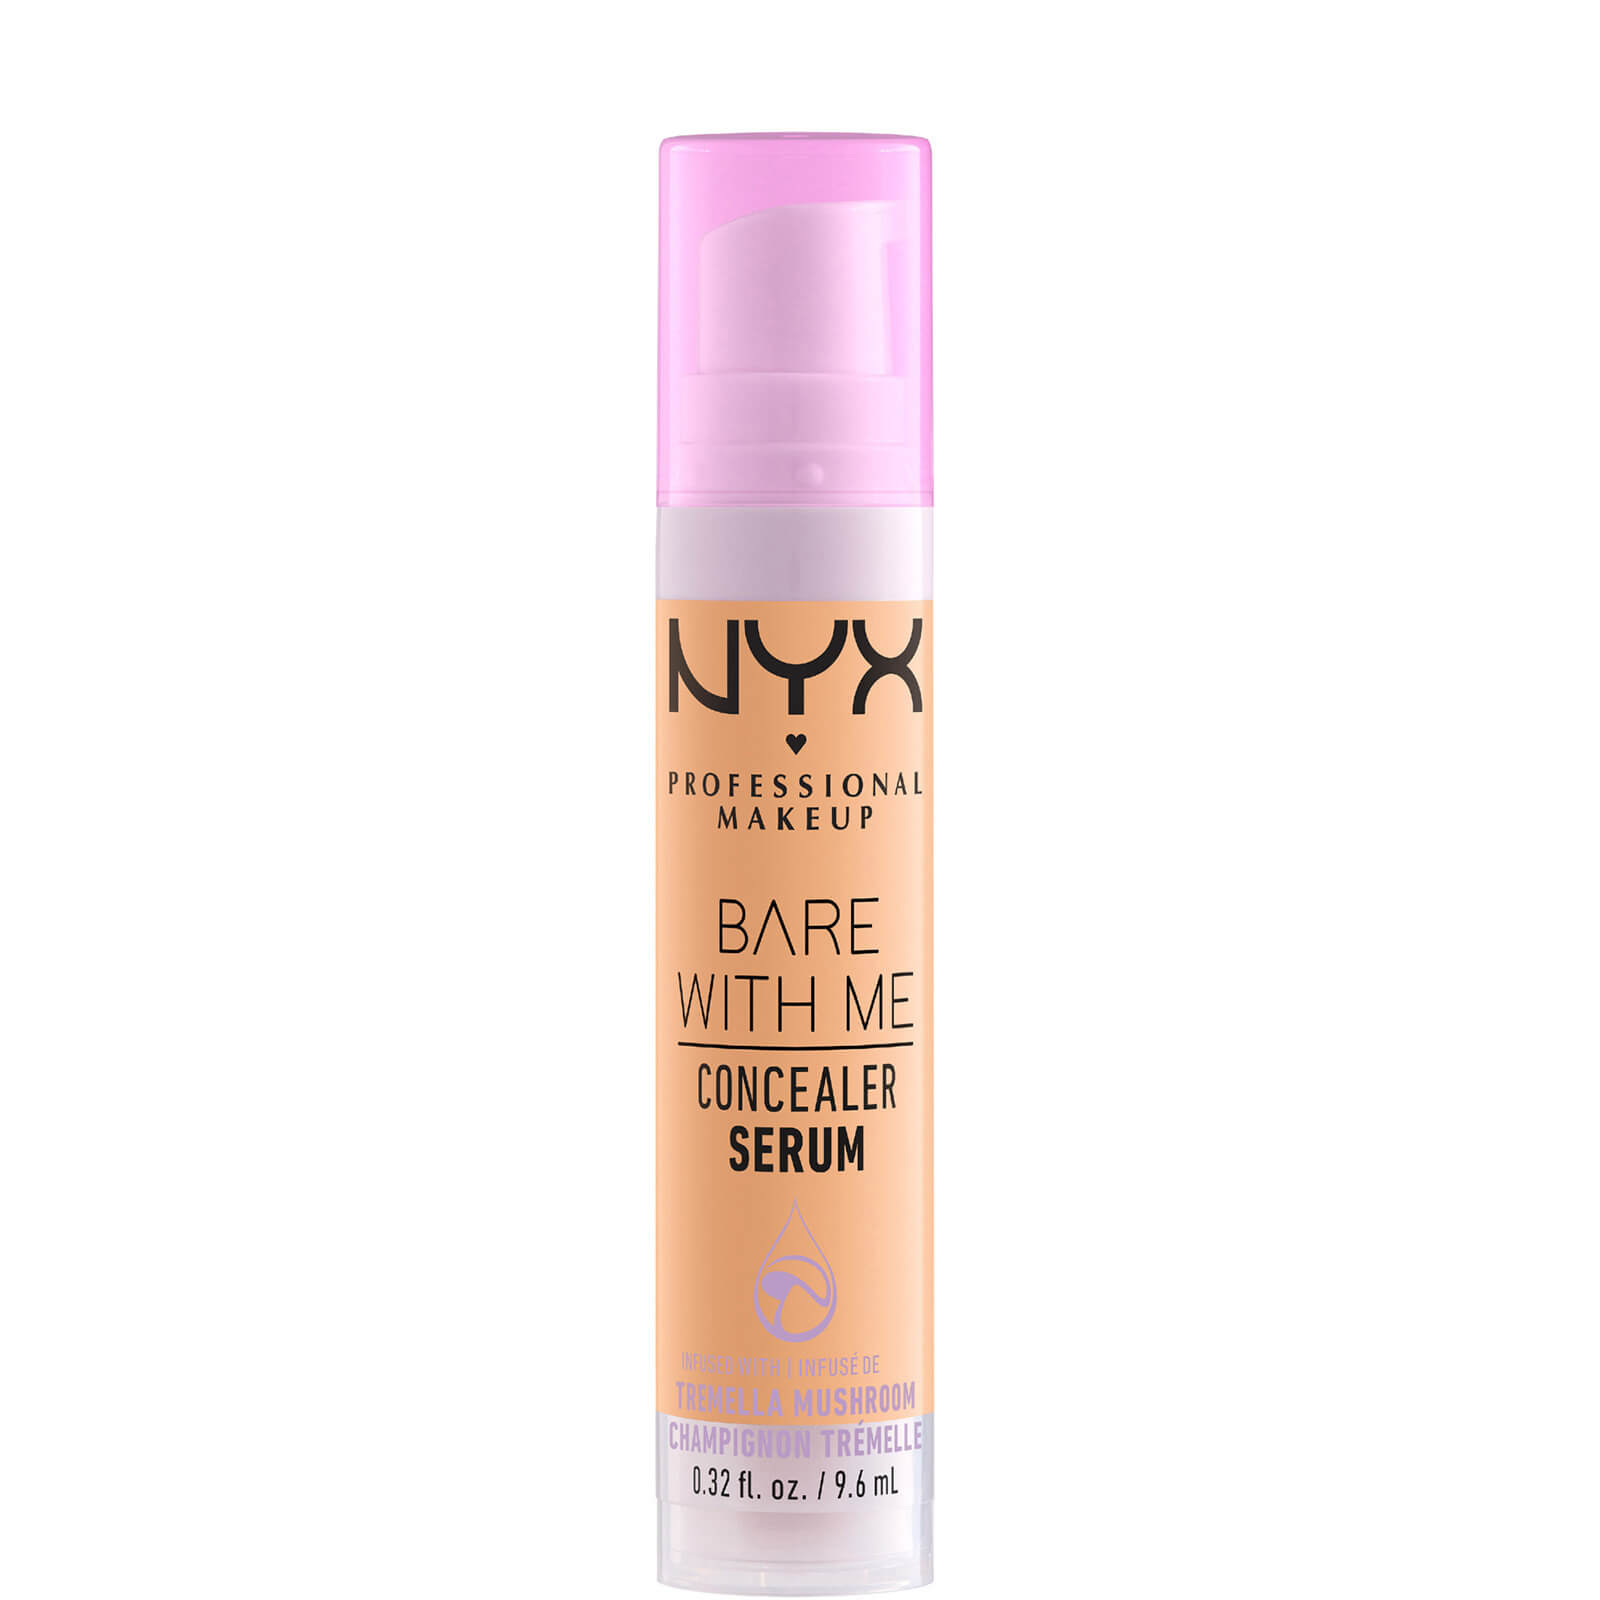 Image of NYX Professional Makeup Bare With Me Concealer Serum 9.6ml (Various Shades) - Tan